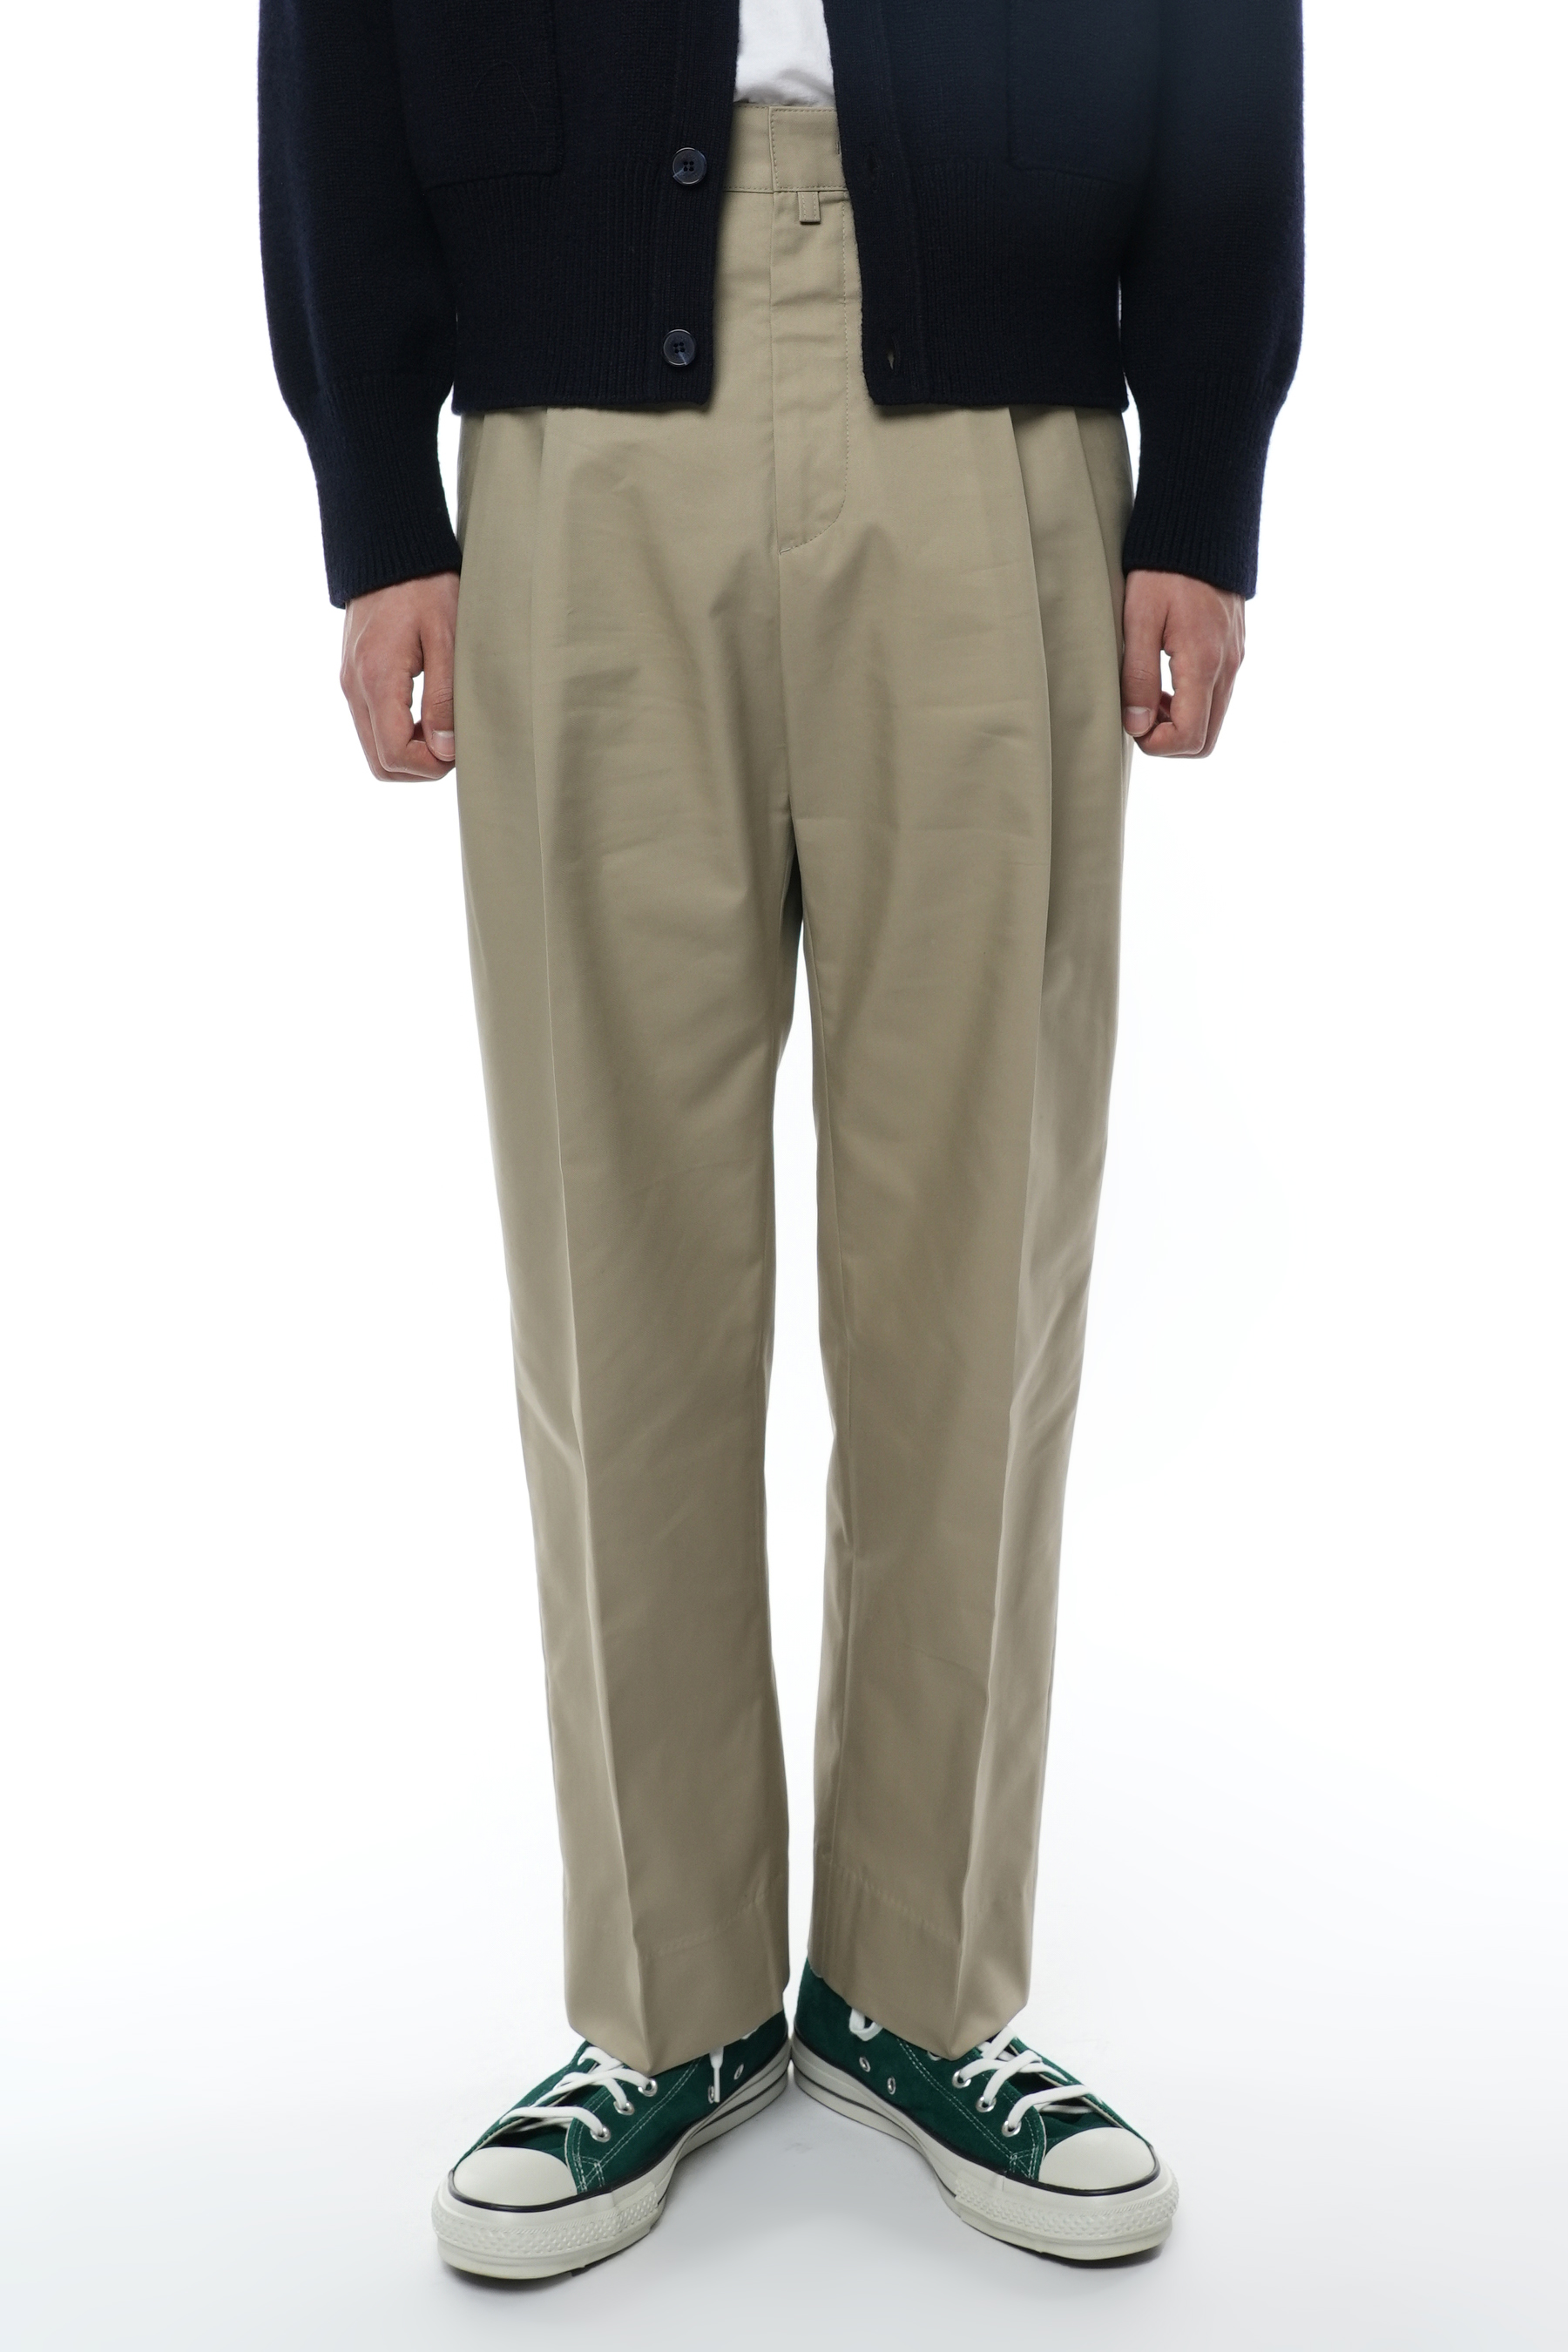 OYSTER R-802 TWO TUCK TAPERED COTTON DRILL CHINO PANTS (ECP MACHINE WASH TEST)